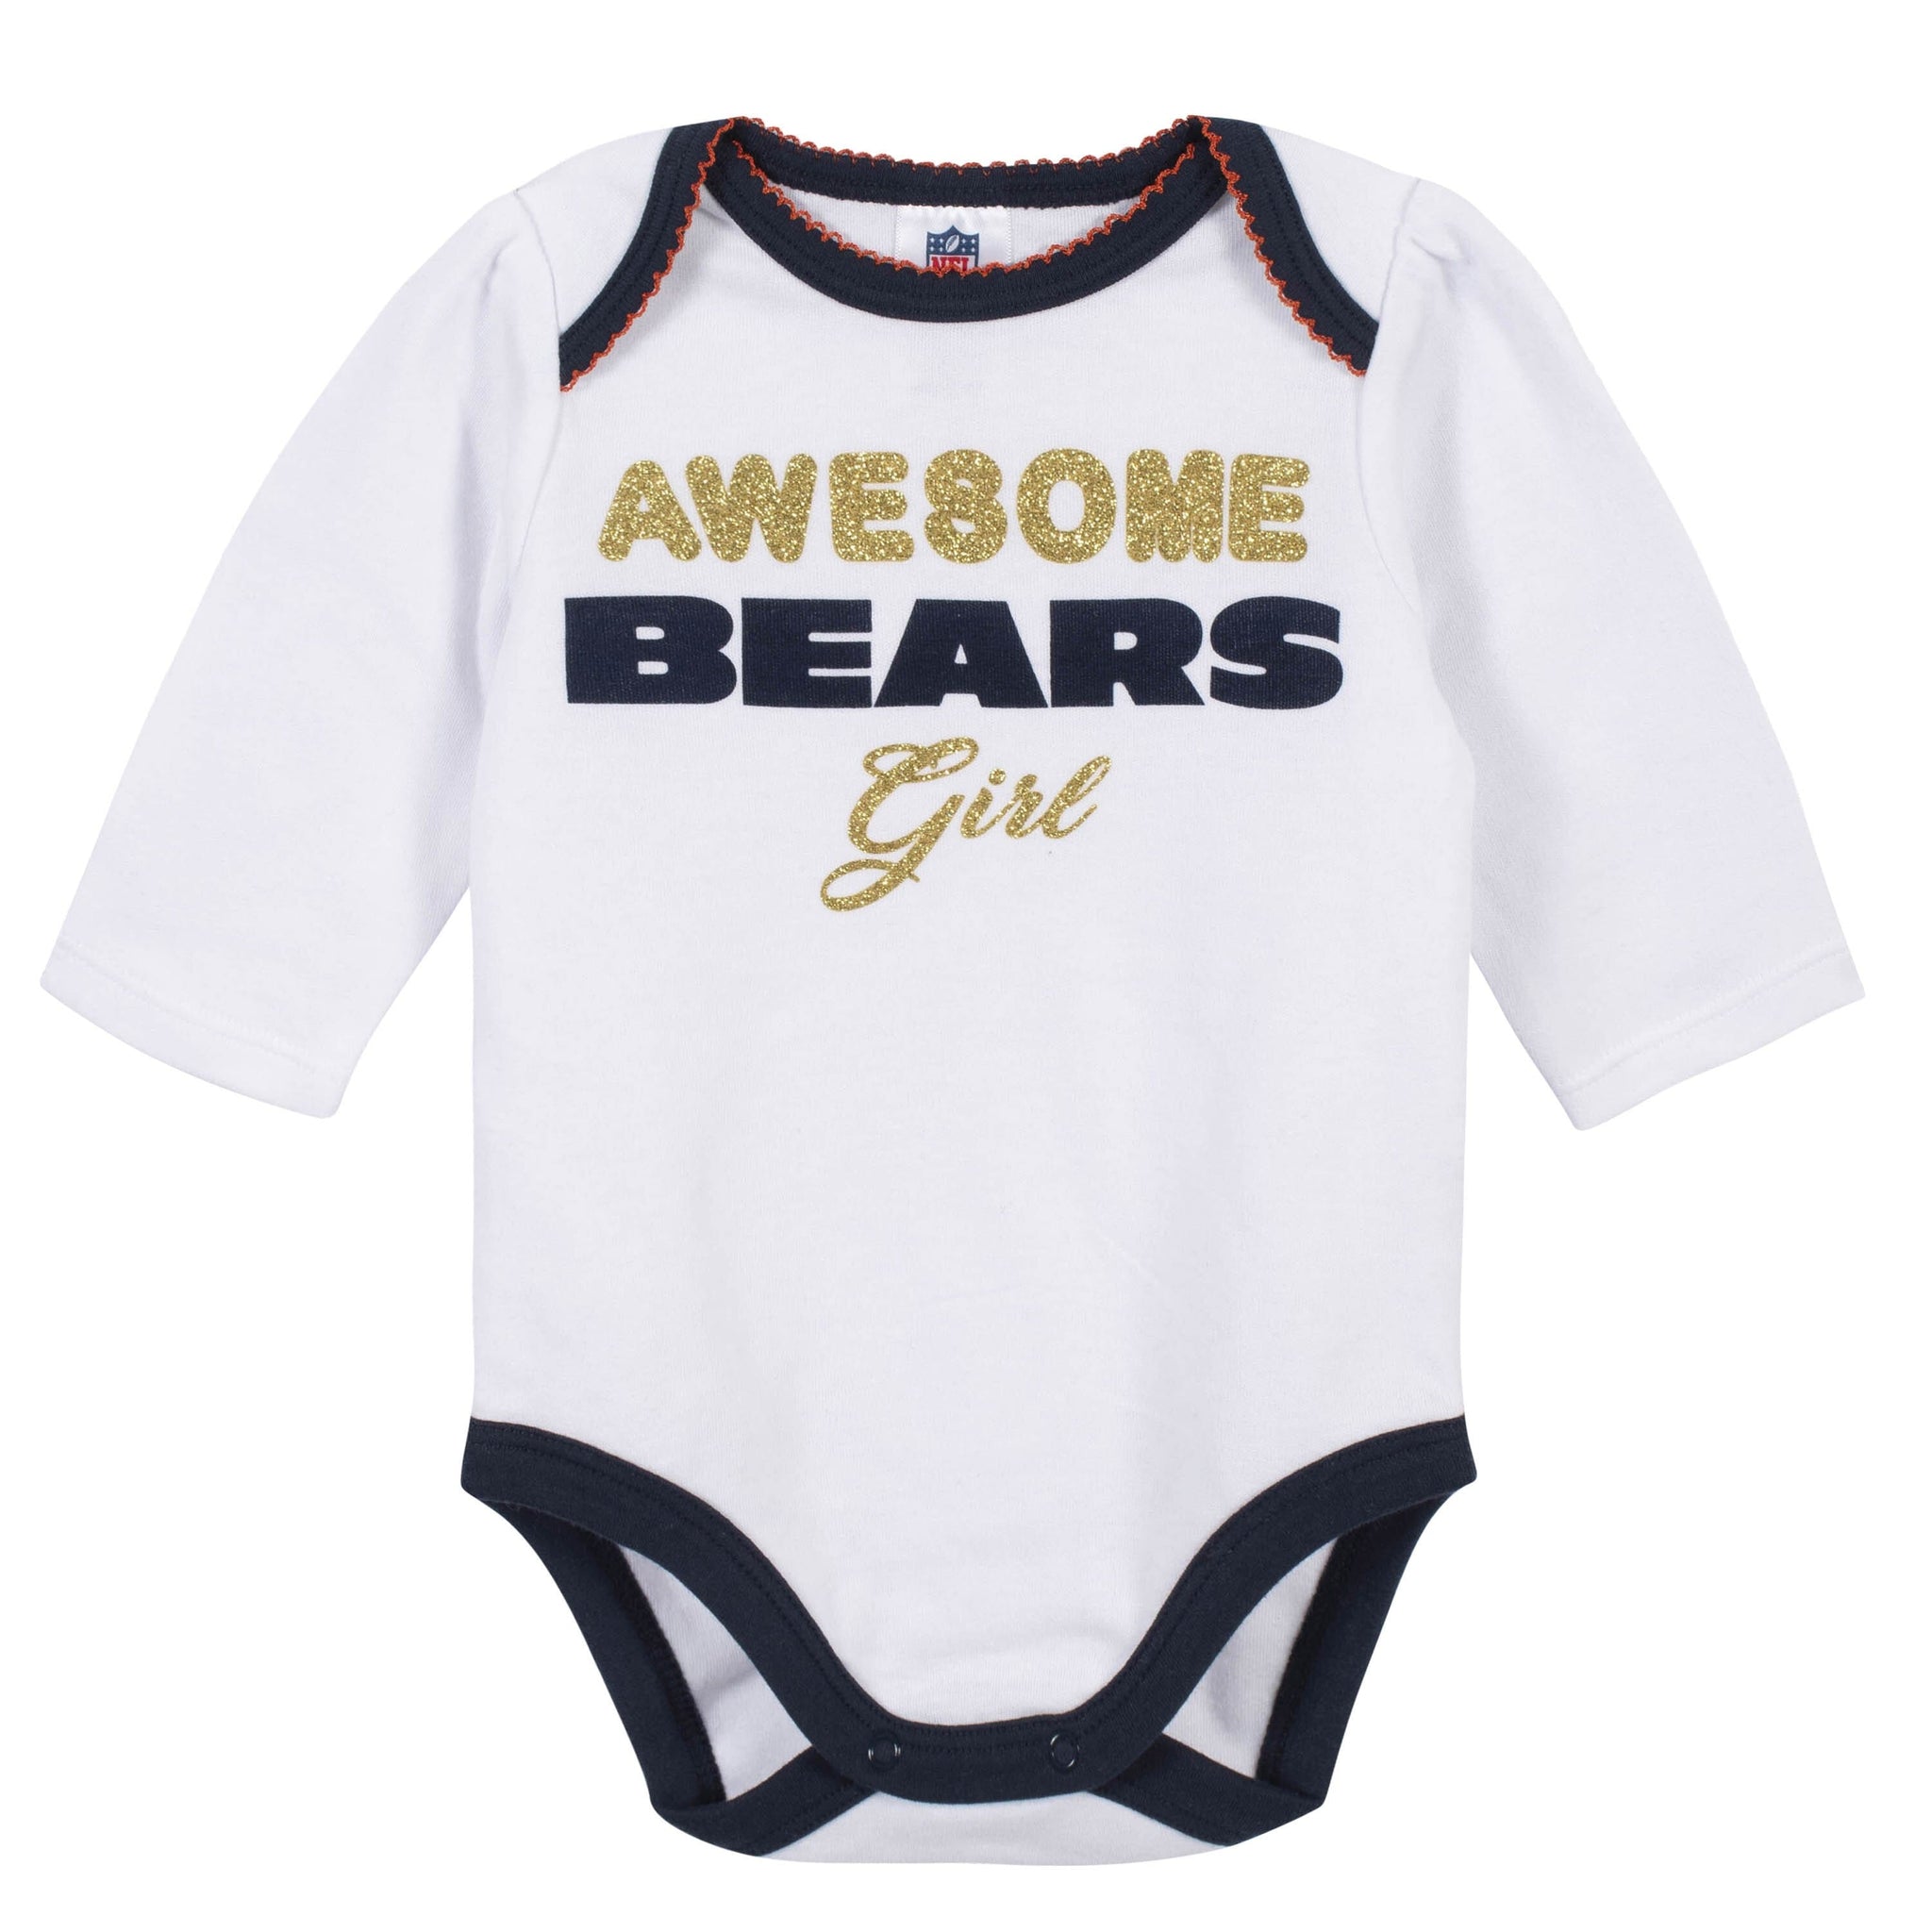 baby chicago bears jersey